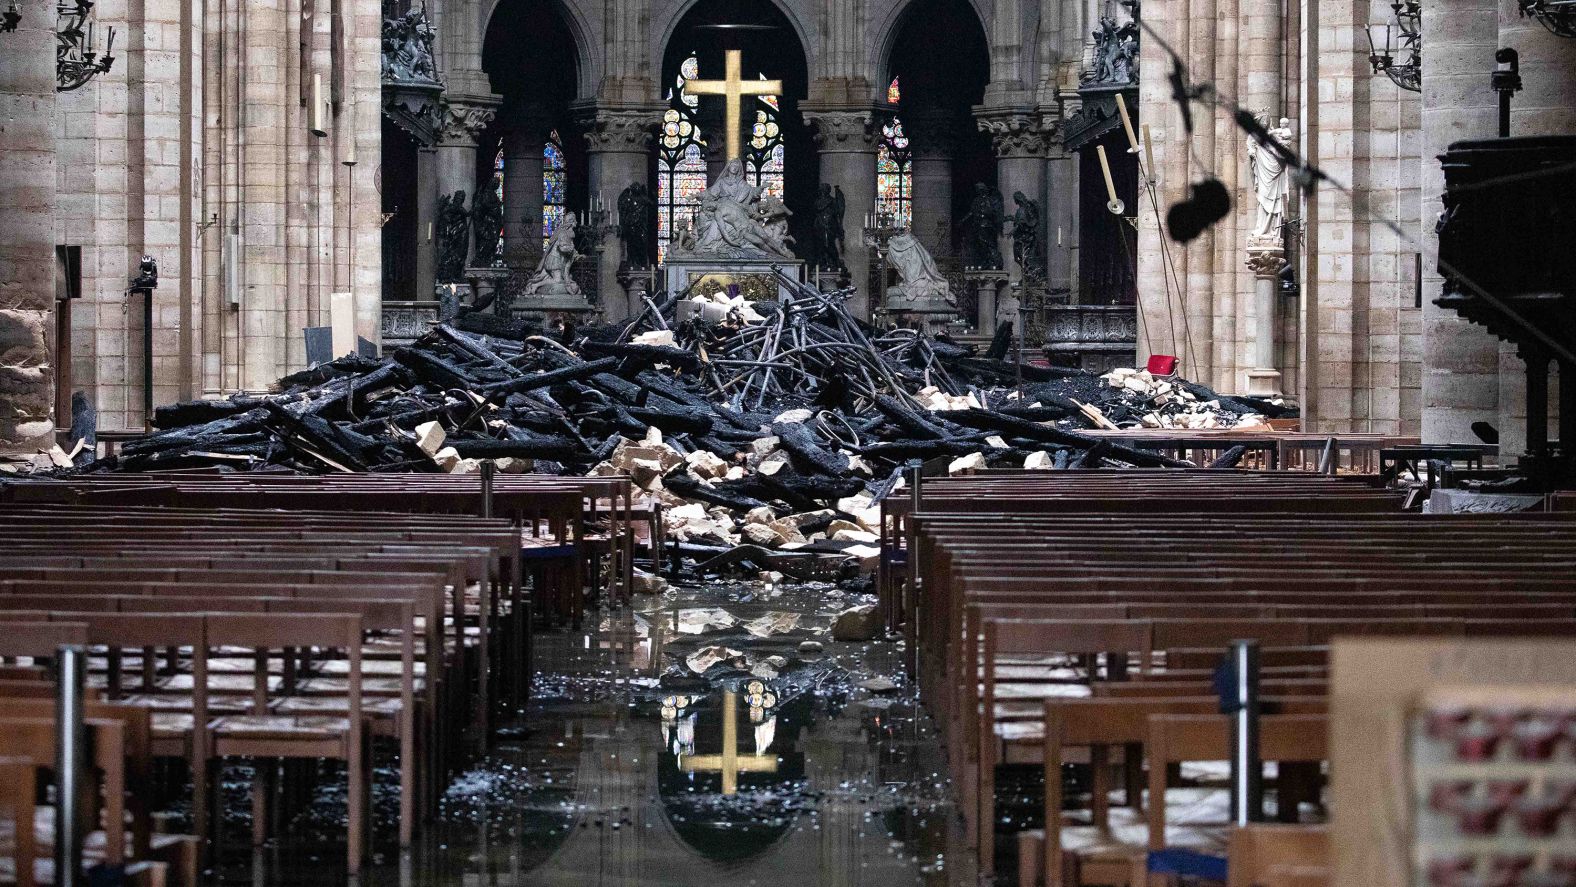 Debris from the roof lies near the altar inside Notre Dame Cathedral in Paris on April 16, 2019, the day after the devastating fire.